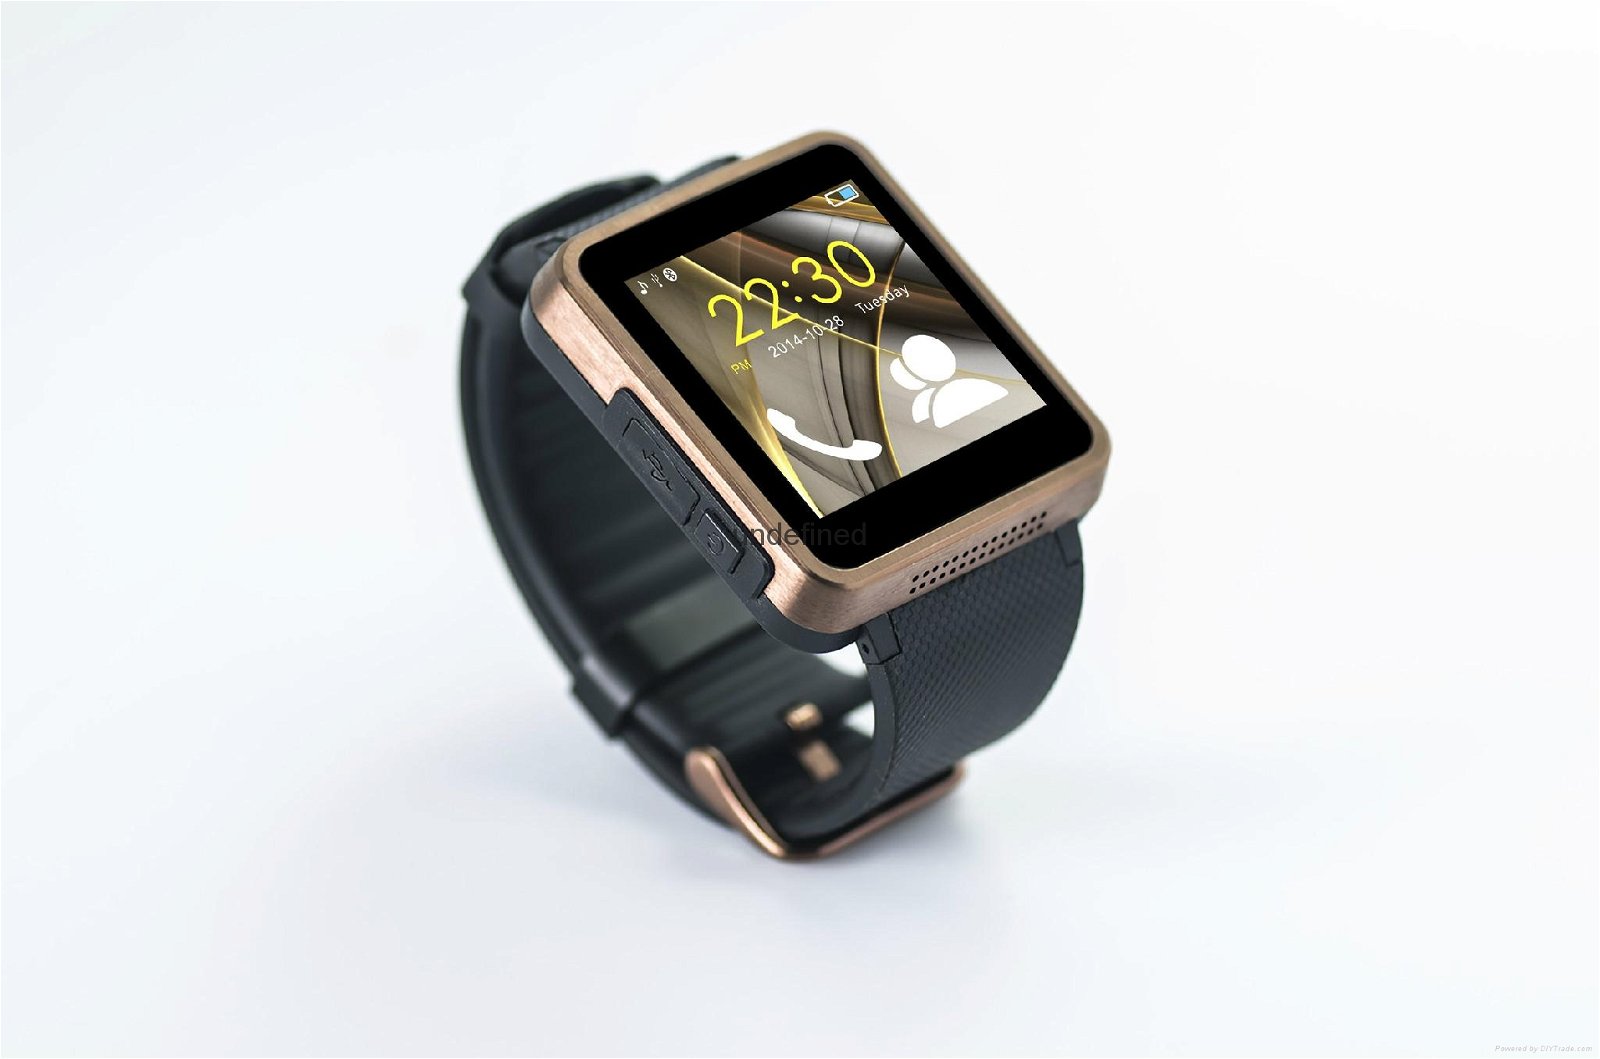 Mobile phone Smart Watch 3